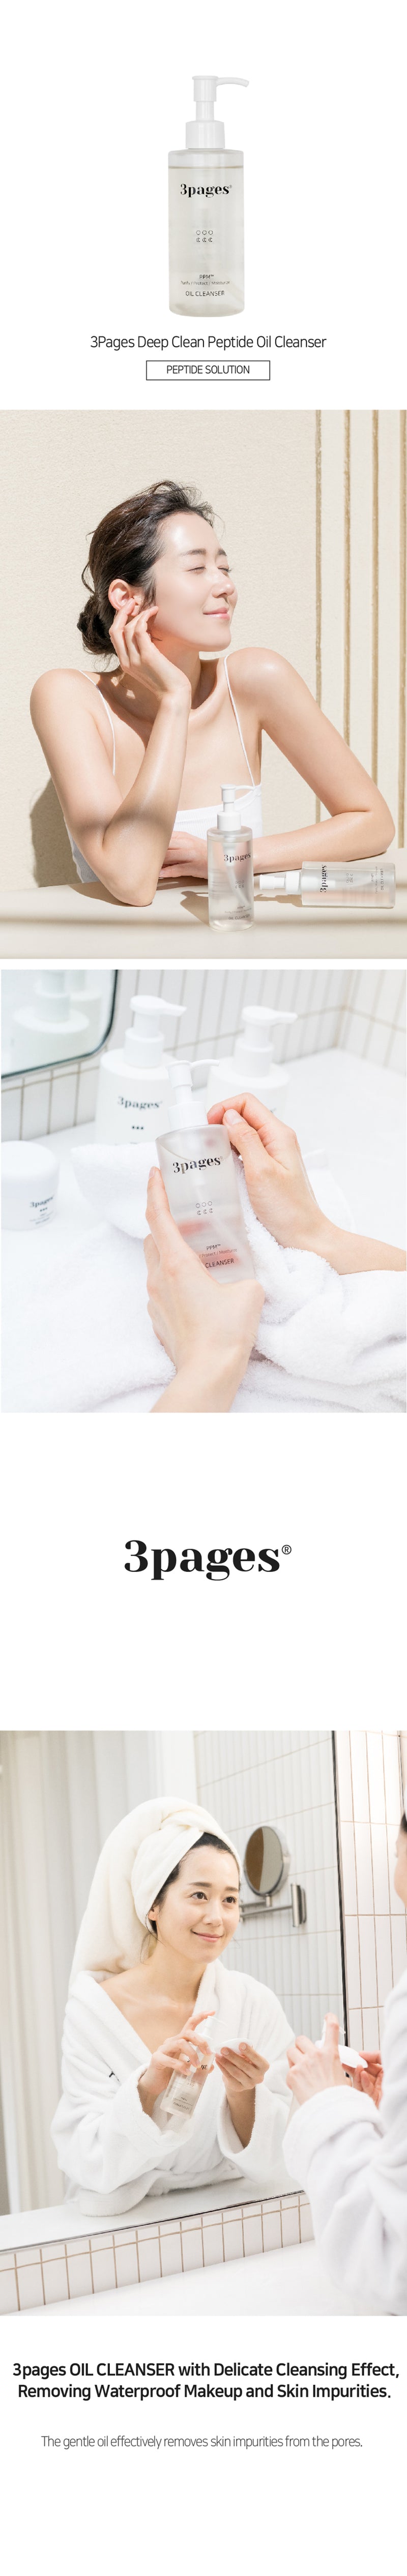 3PAGES® Deep Clean Peptide Oil Cleanser